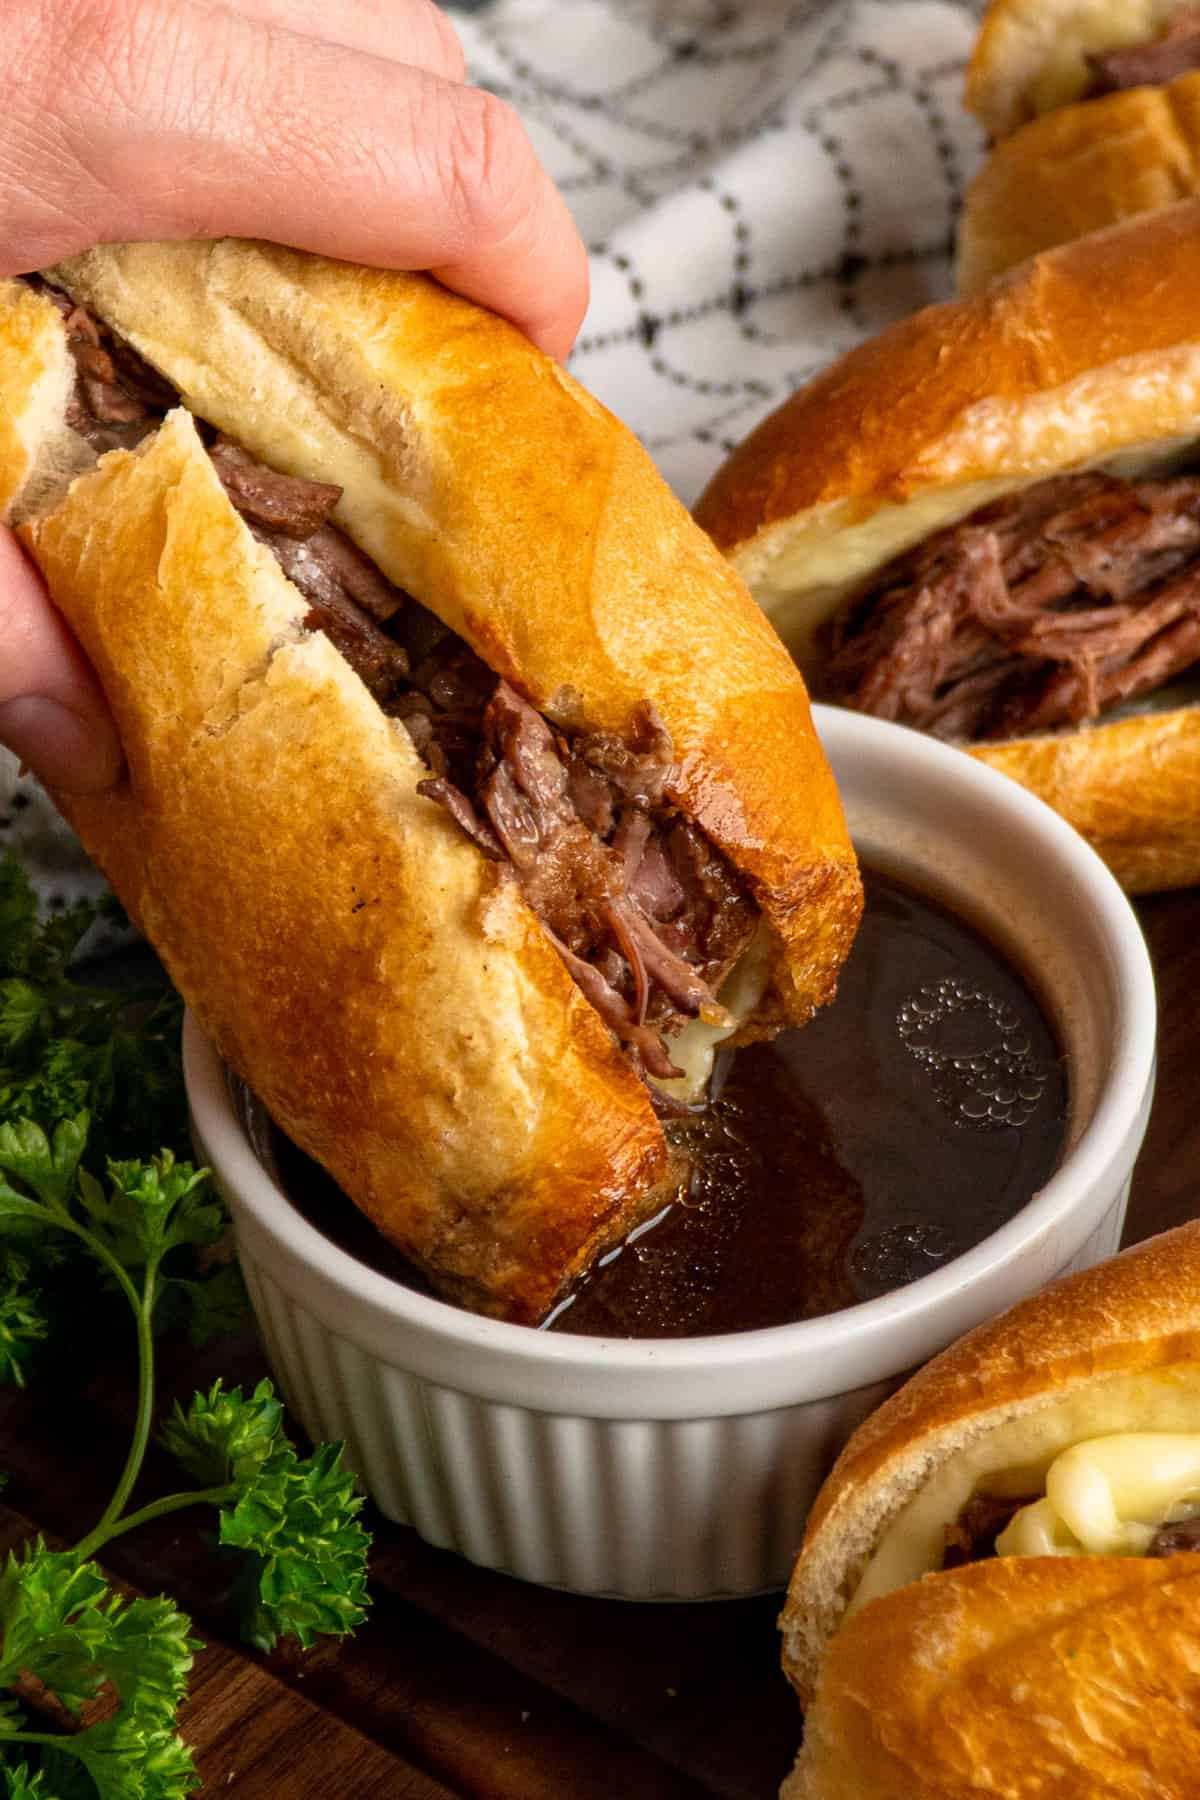 A hand dipping a crock pot French dip sandwich into au jus sauce.